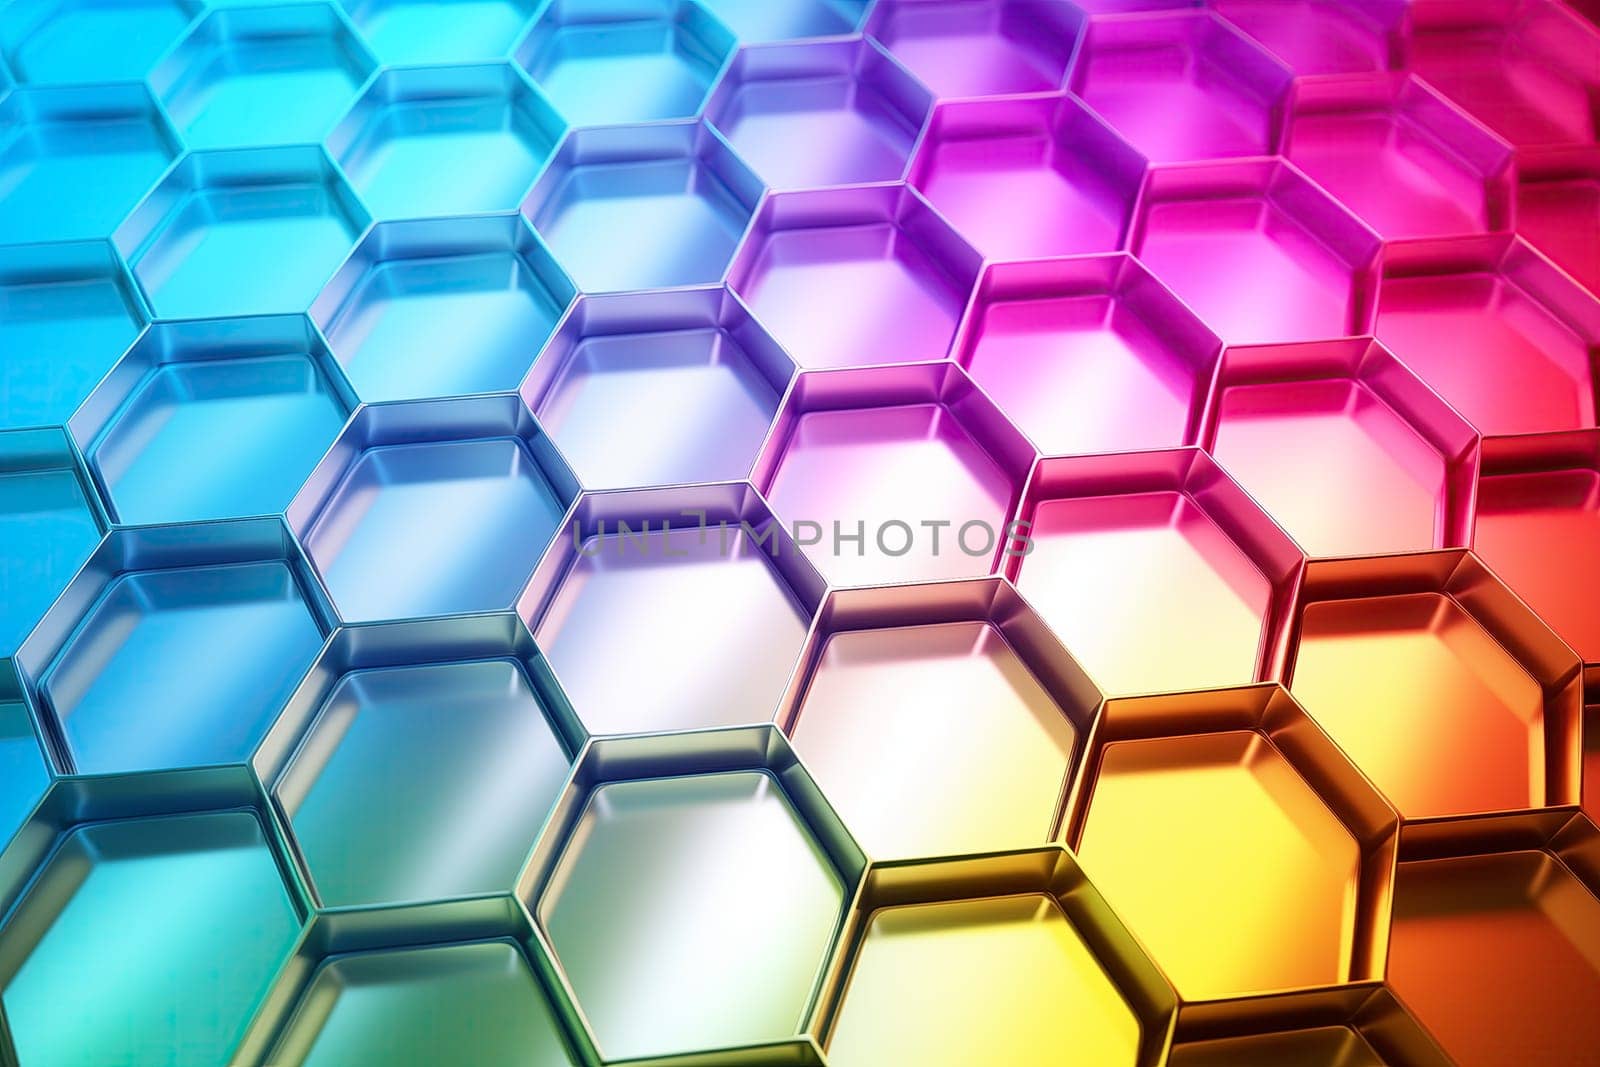 Metallic honeycomb pattern illuminated with vibrant gradient colors abstract background